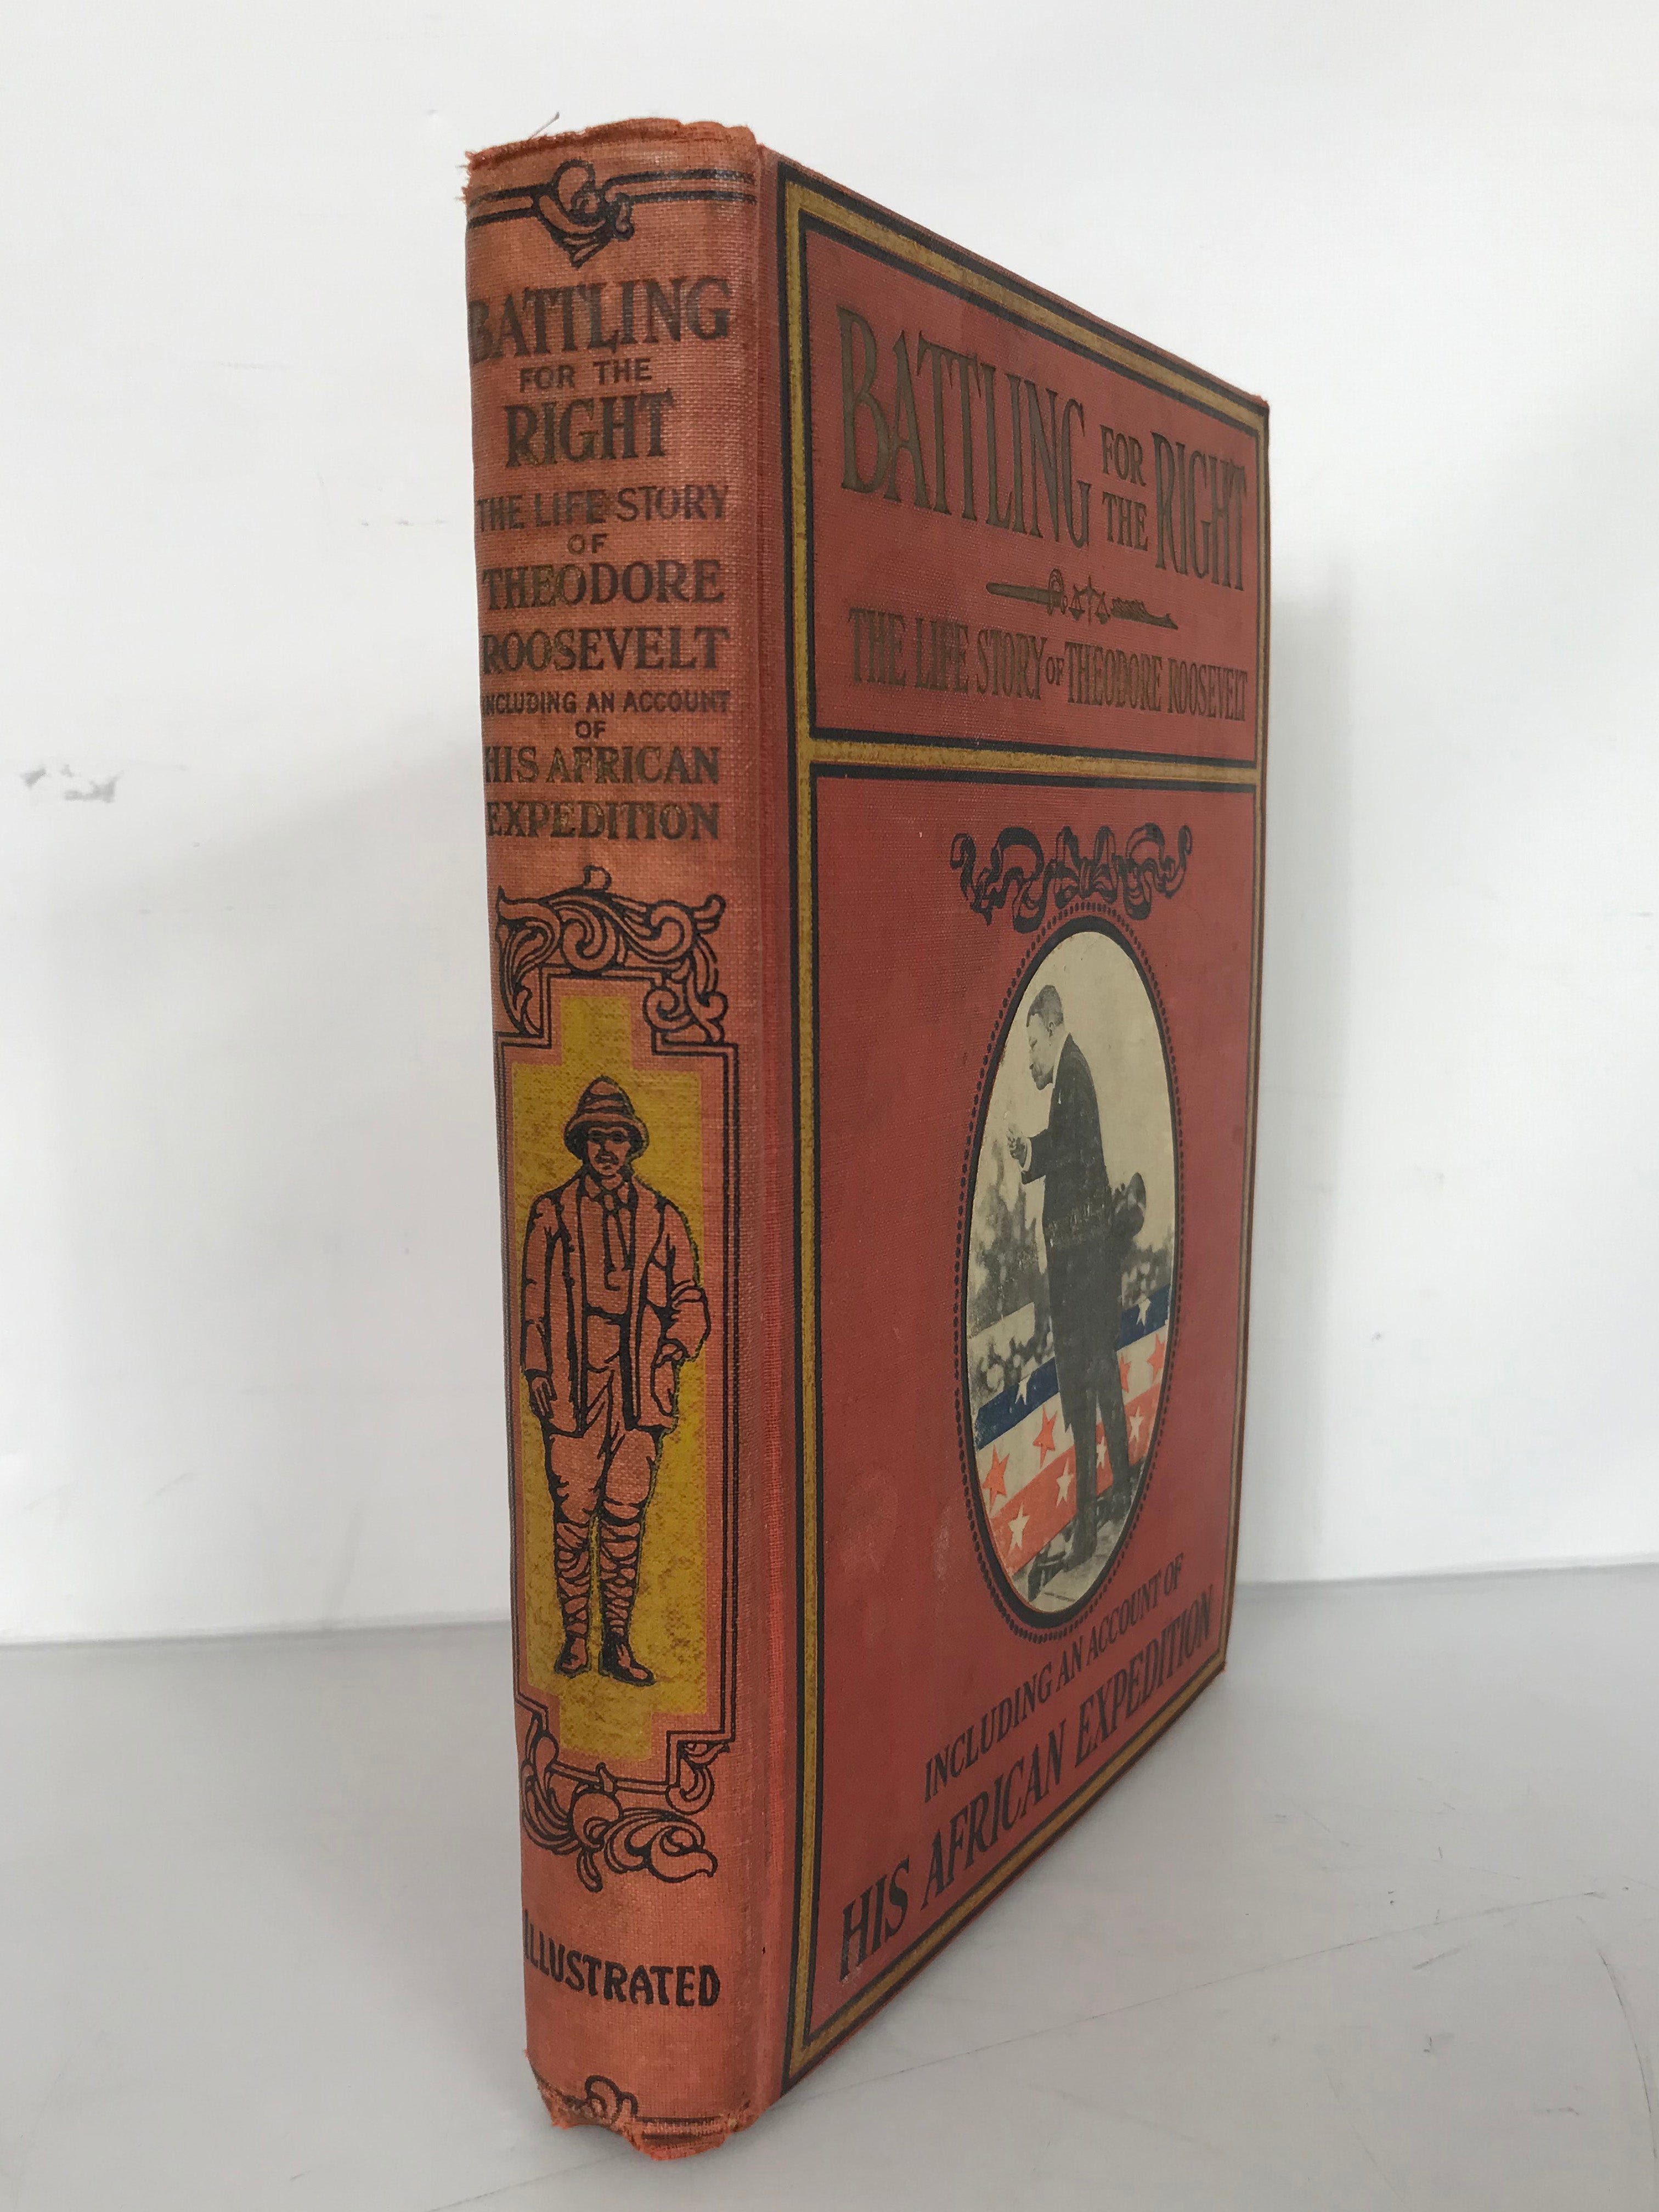 Battling for the Right The Life Story of Theodore Roosevelt Including an Account of His African Expedition 1910